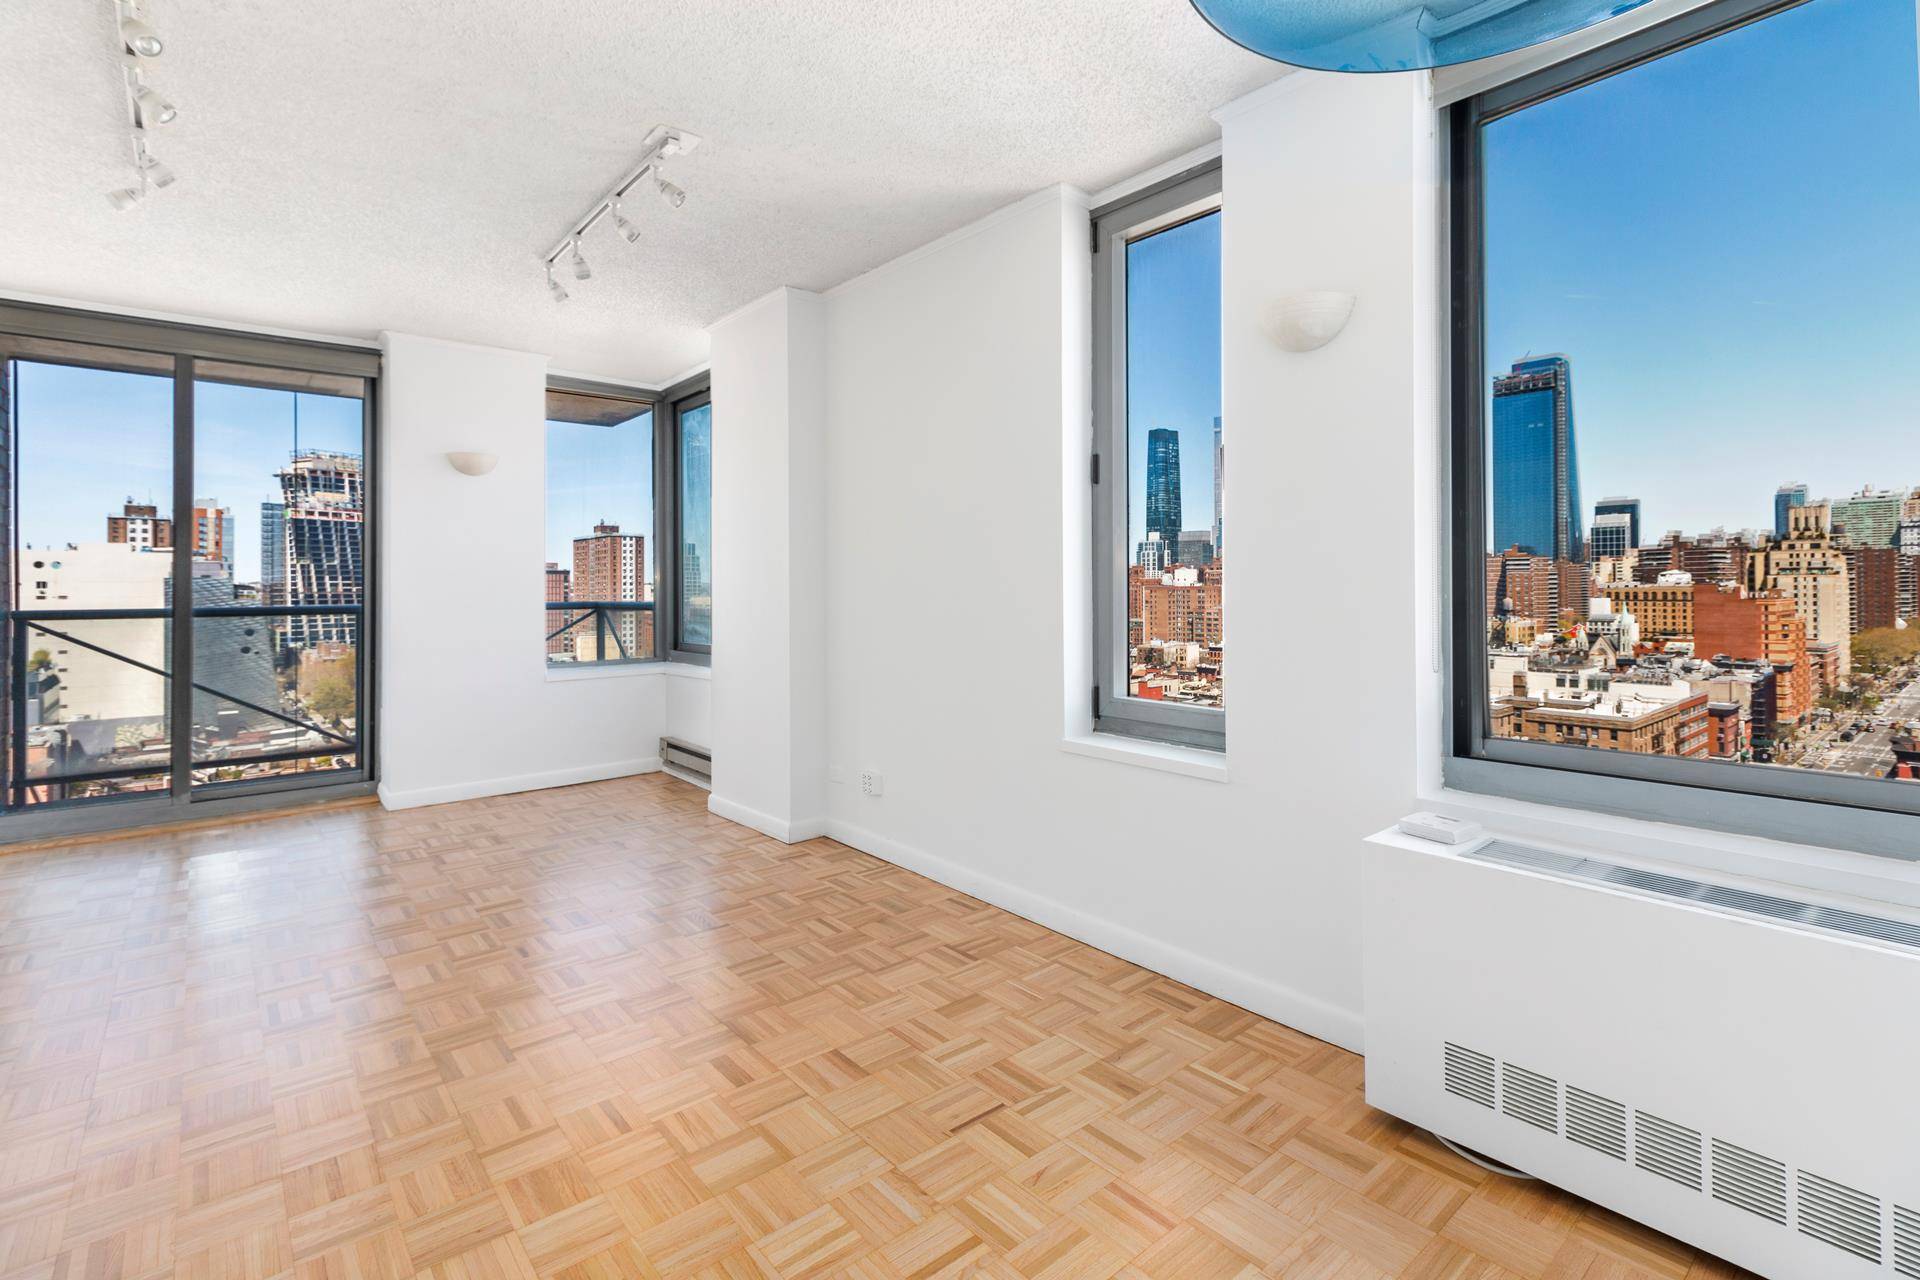 VIEW VIEW VIEW ! ! ! This corner high floor sun blasted 1 bed 1 bath with private balcony in the ultra hip Chelsea Meatpacking is a rare gem.